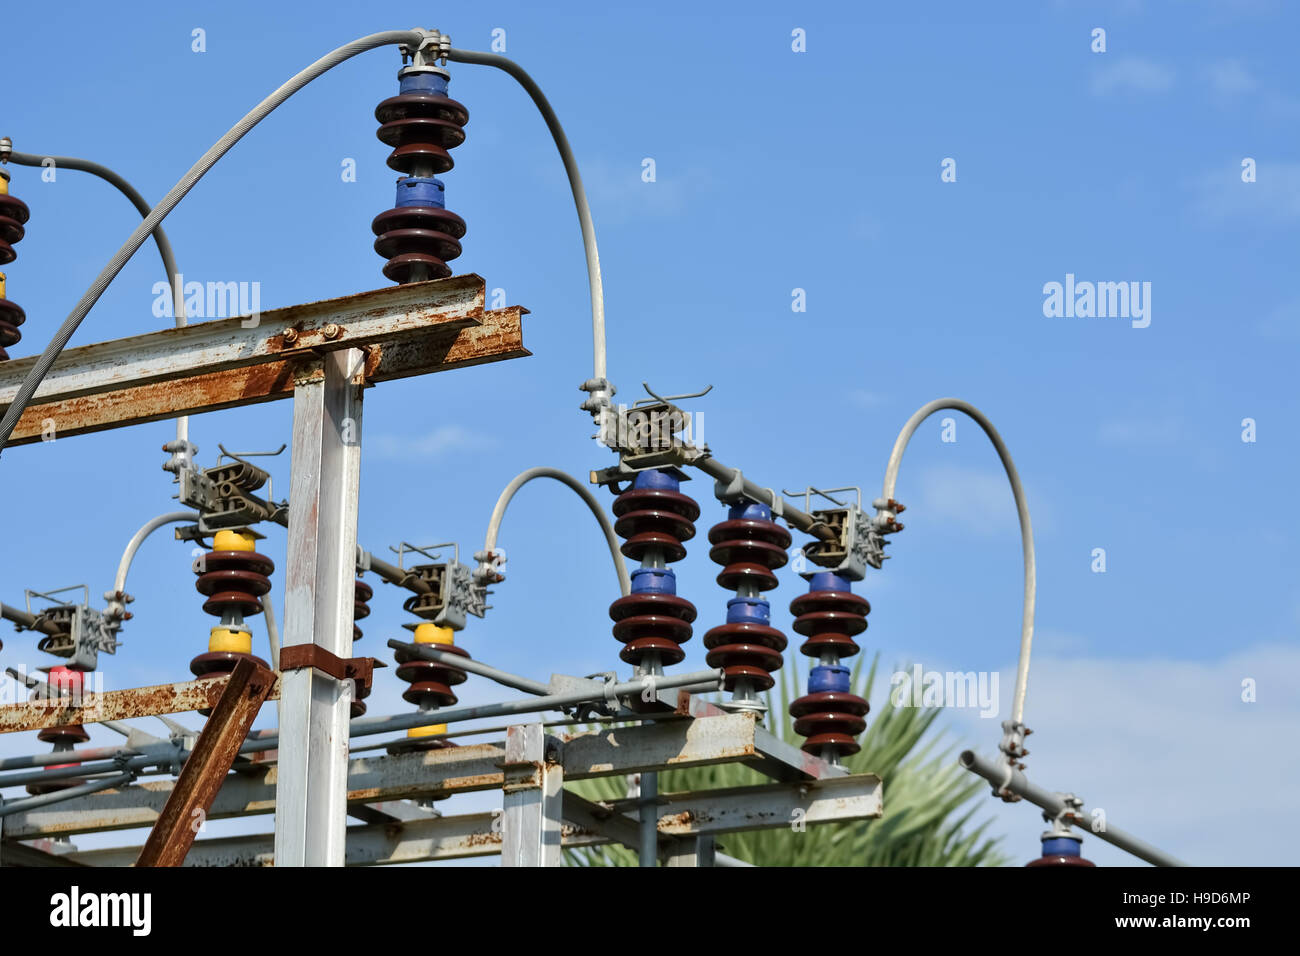 High voltage circuit breaker. Power substation Stock Photo